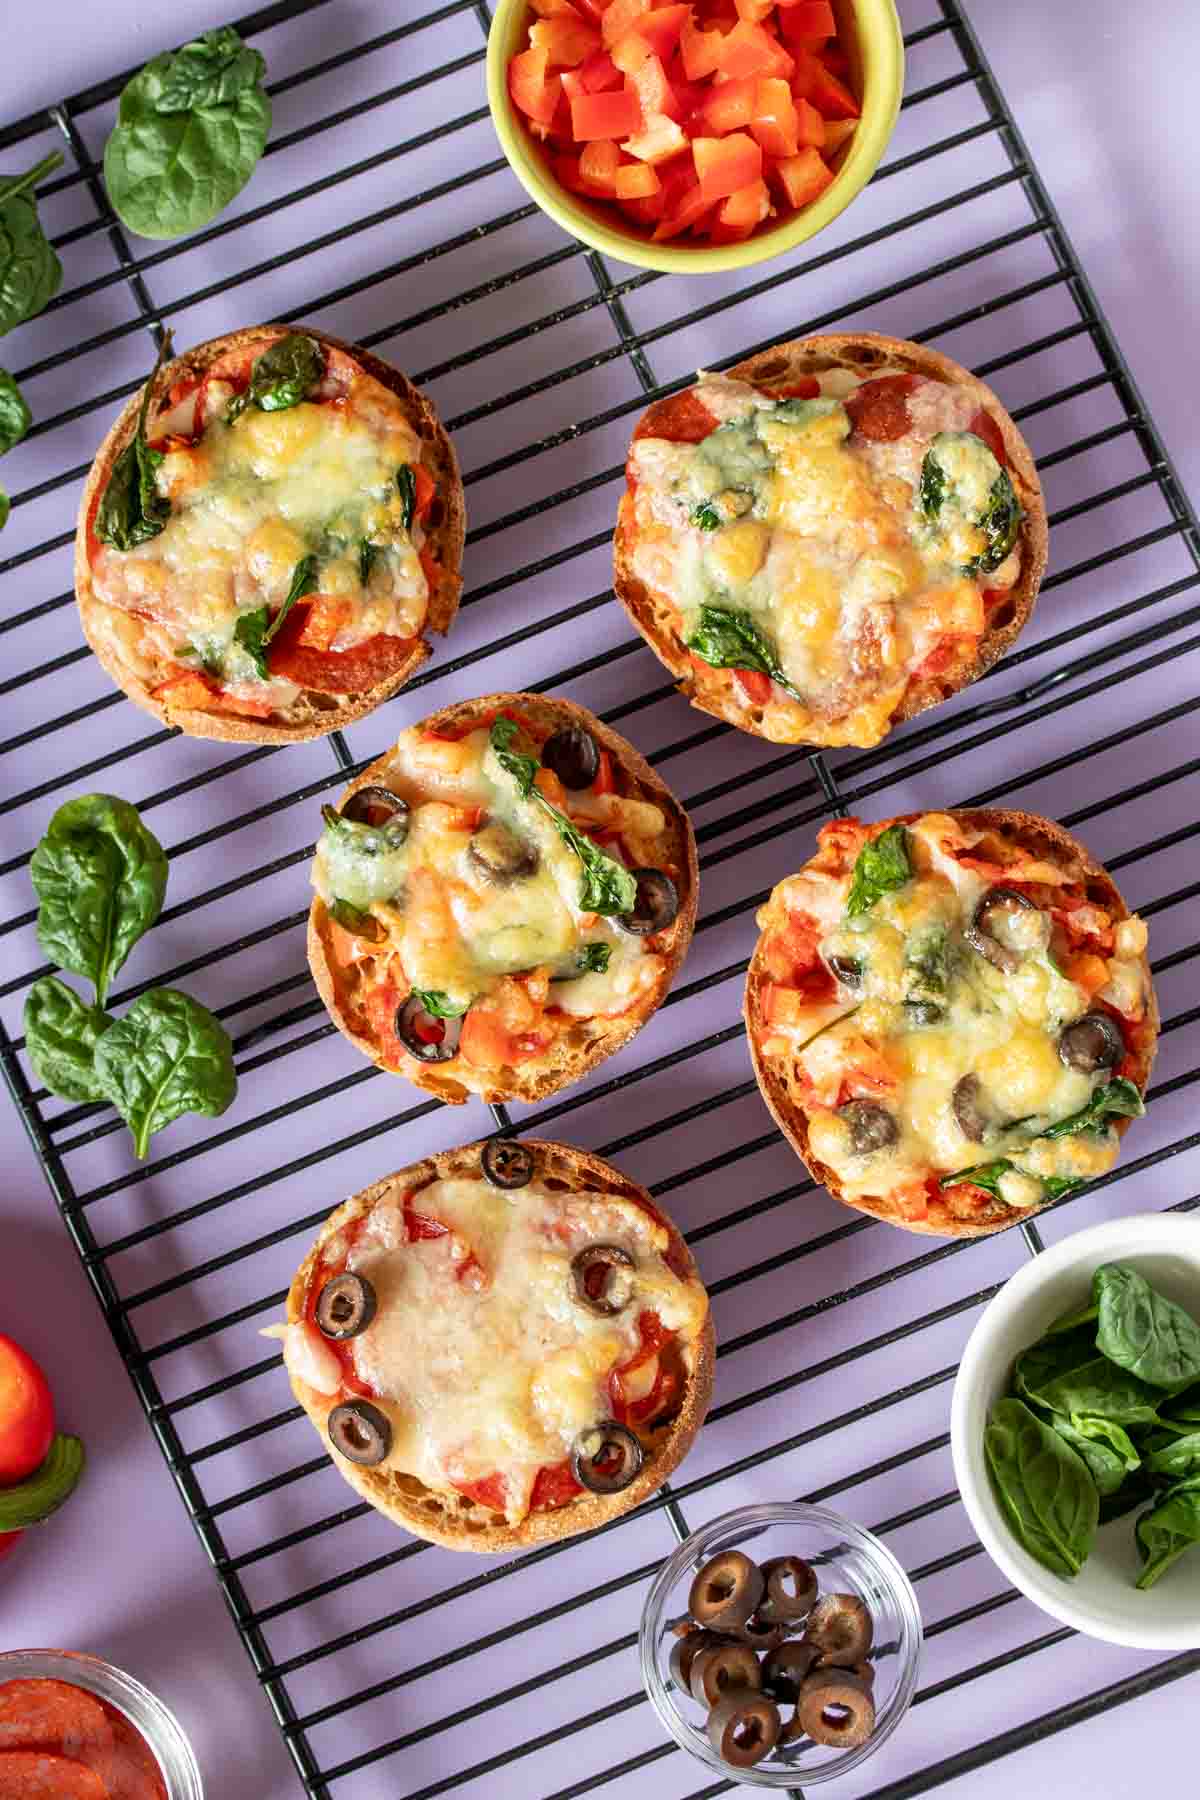 Baked English muffin pizzas on a black cooling rack with ingredients in bowls next to them on a purple surface.